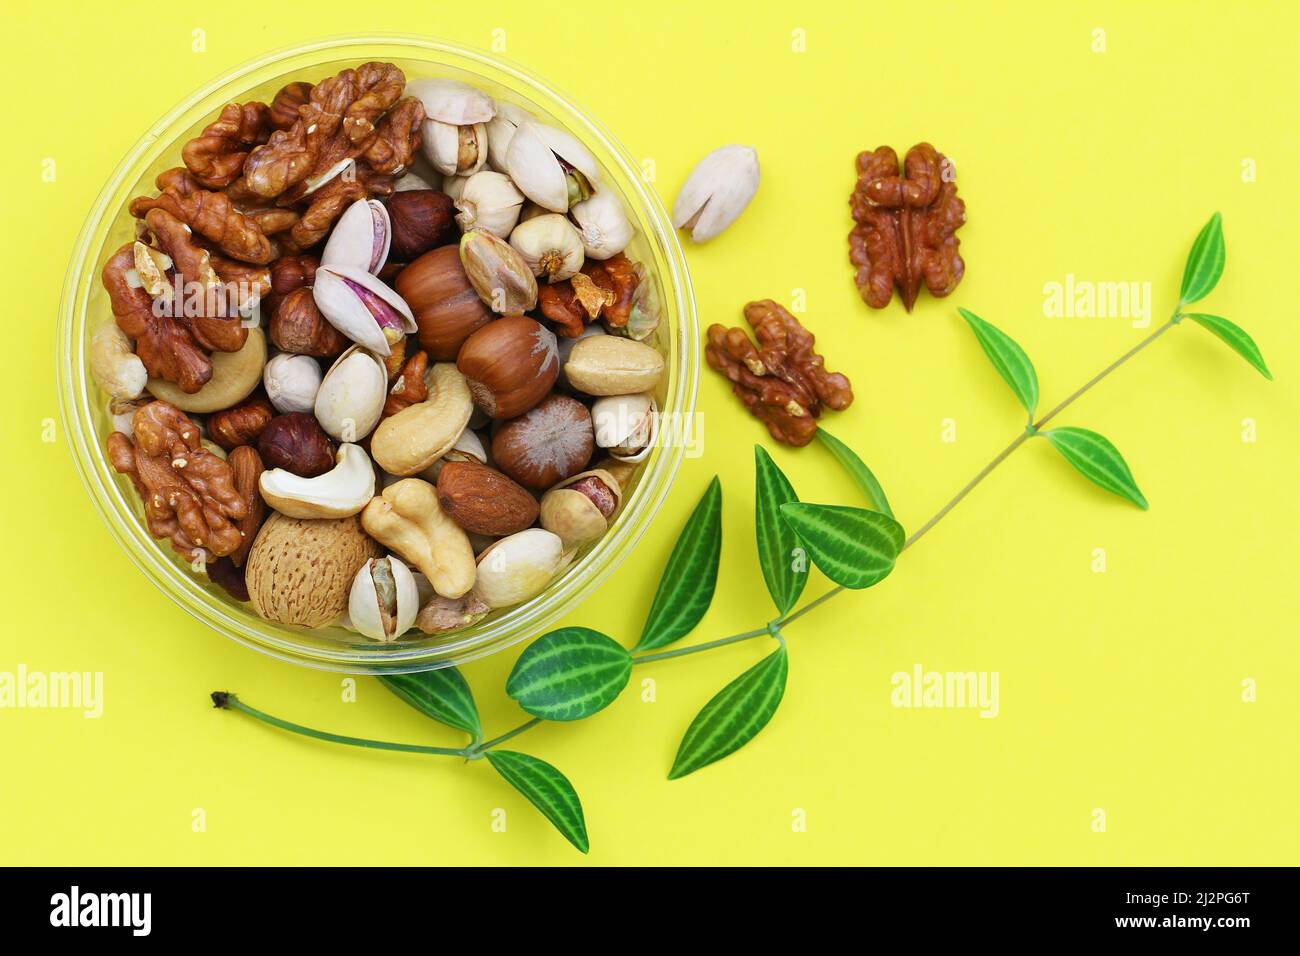 Selection of walnuts, hazelnuts, cashew nuts and almonds in plastic box on vivid yellow background Stock Photo